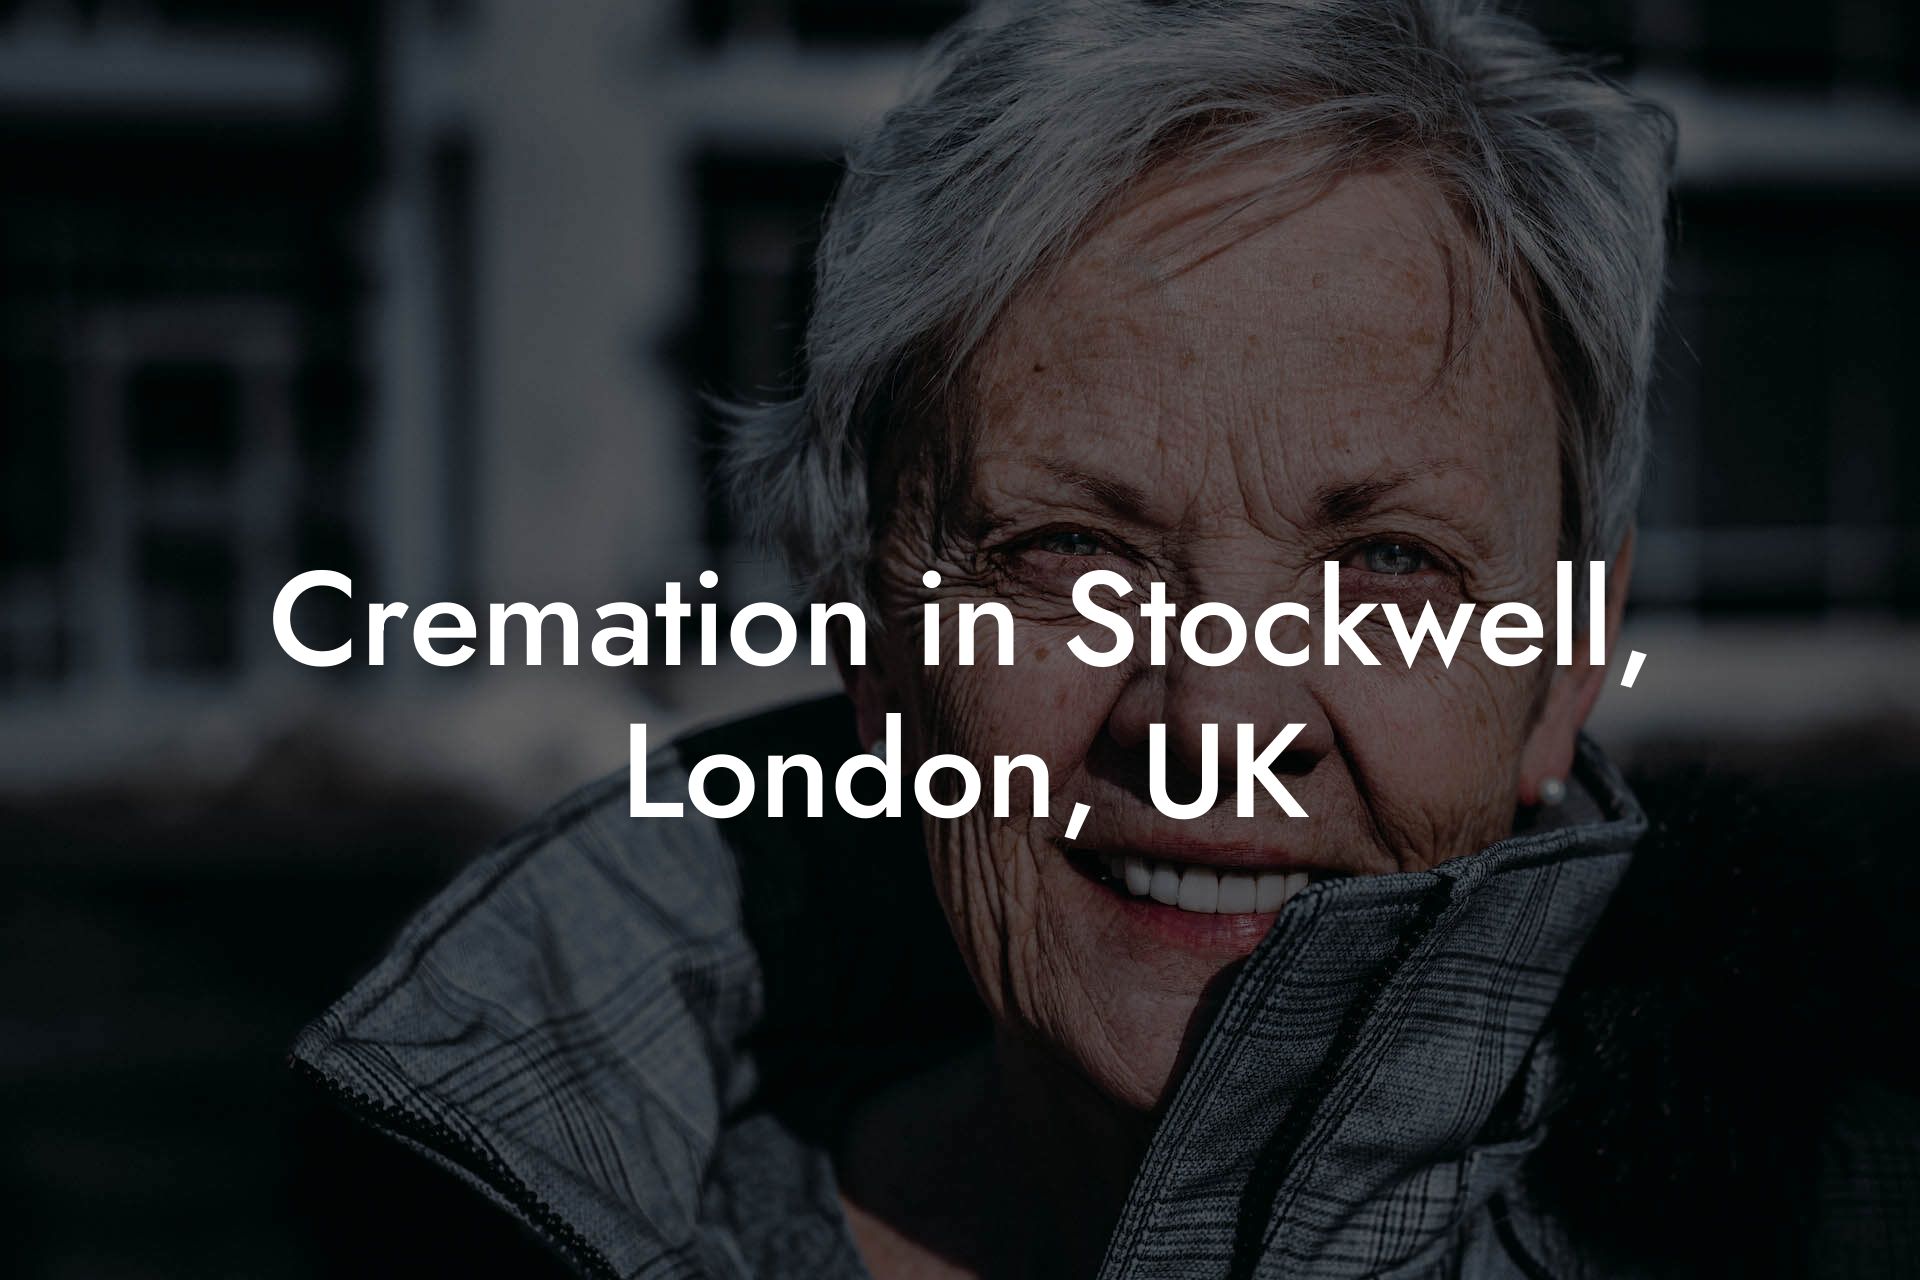 Cremation in Stockwell, London, UK